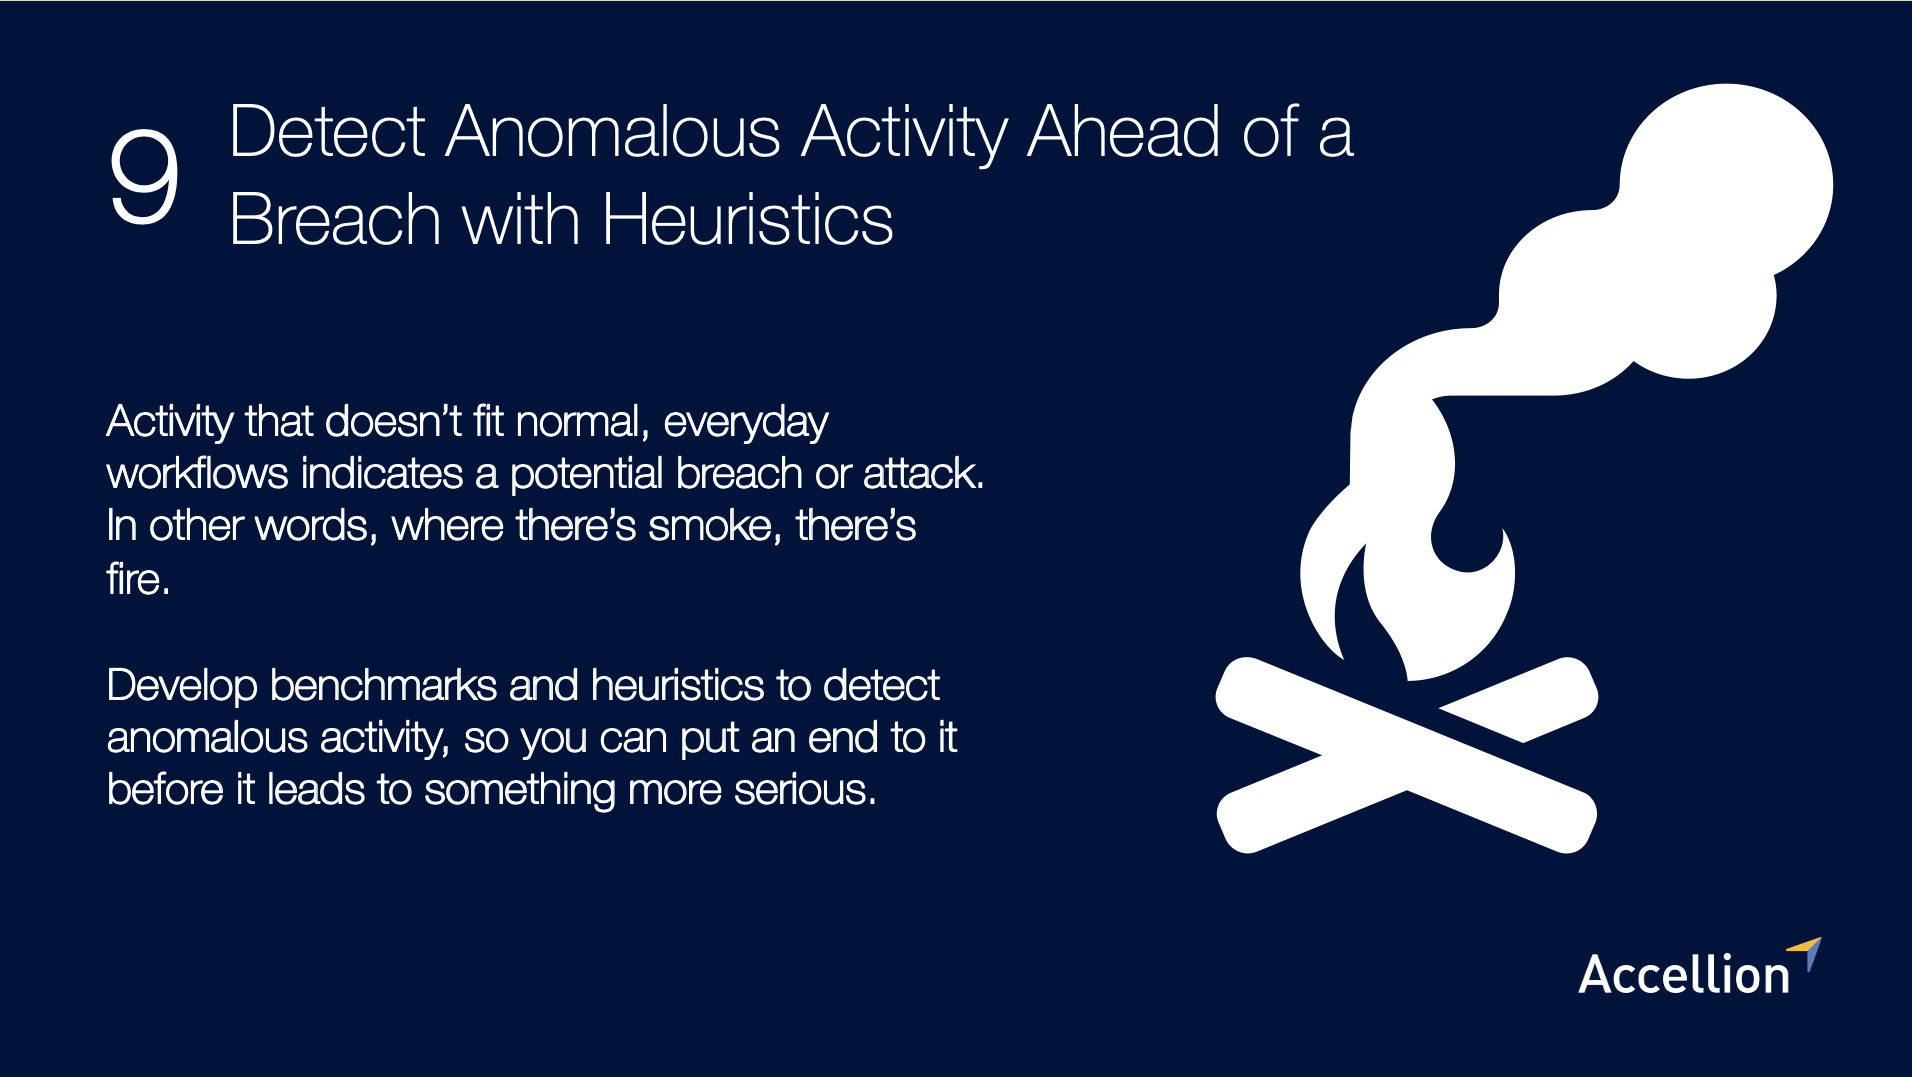 Detect Anomalous Activity Ahead of a Data Breach With Heuristics